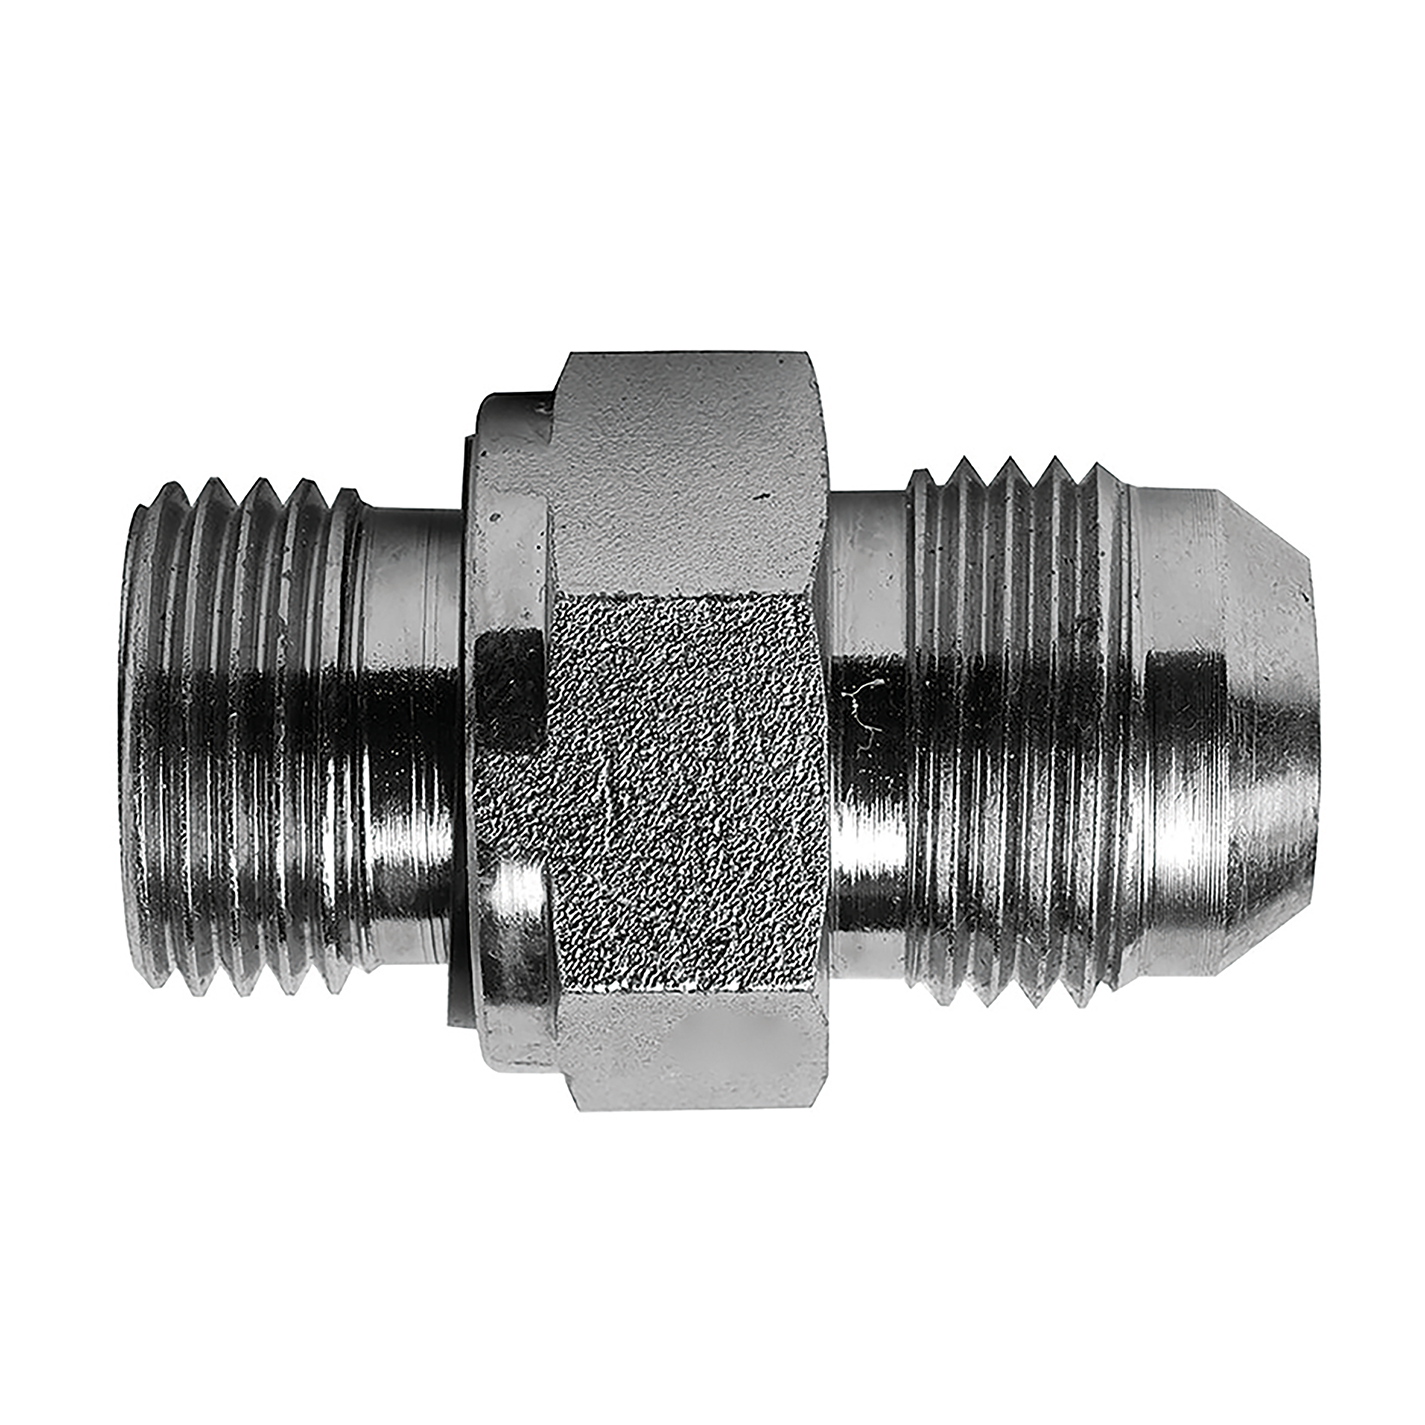 1/2" BSPP Malex7/8" JIC Male Adaptor with Seal